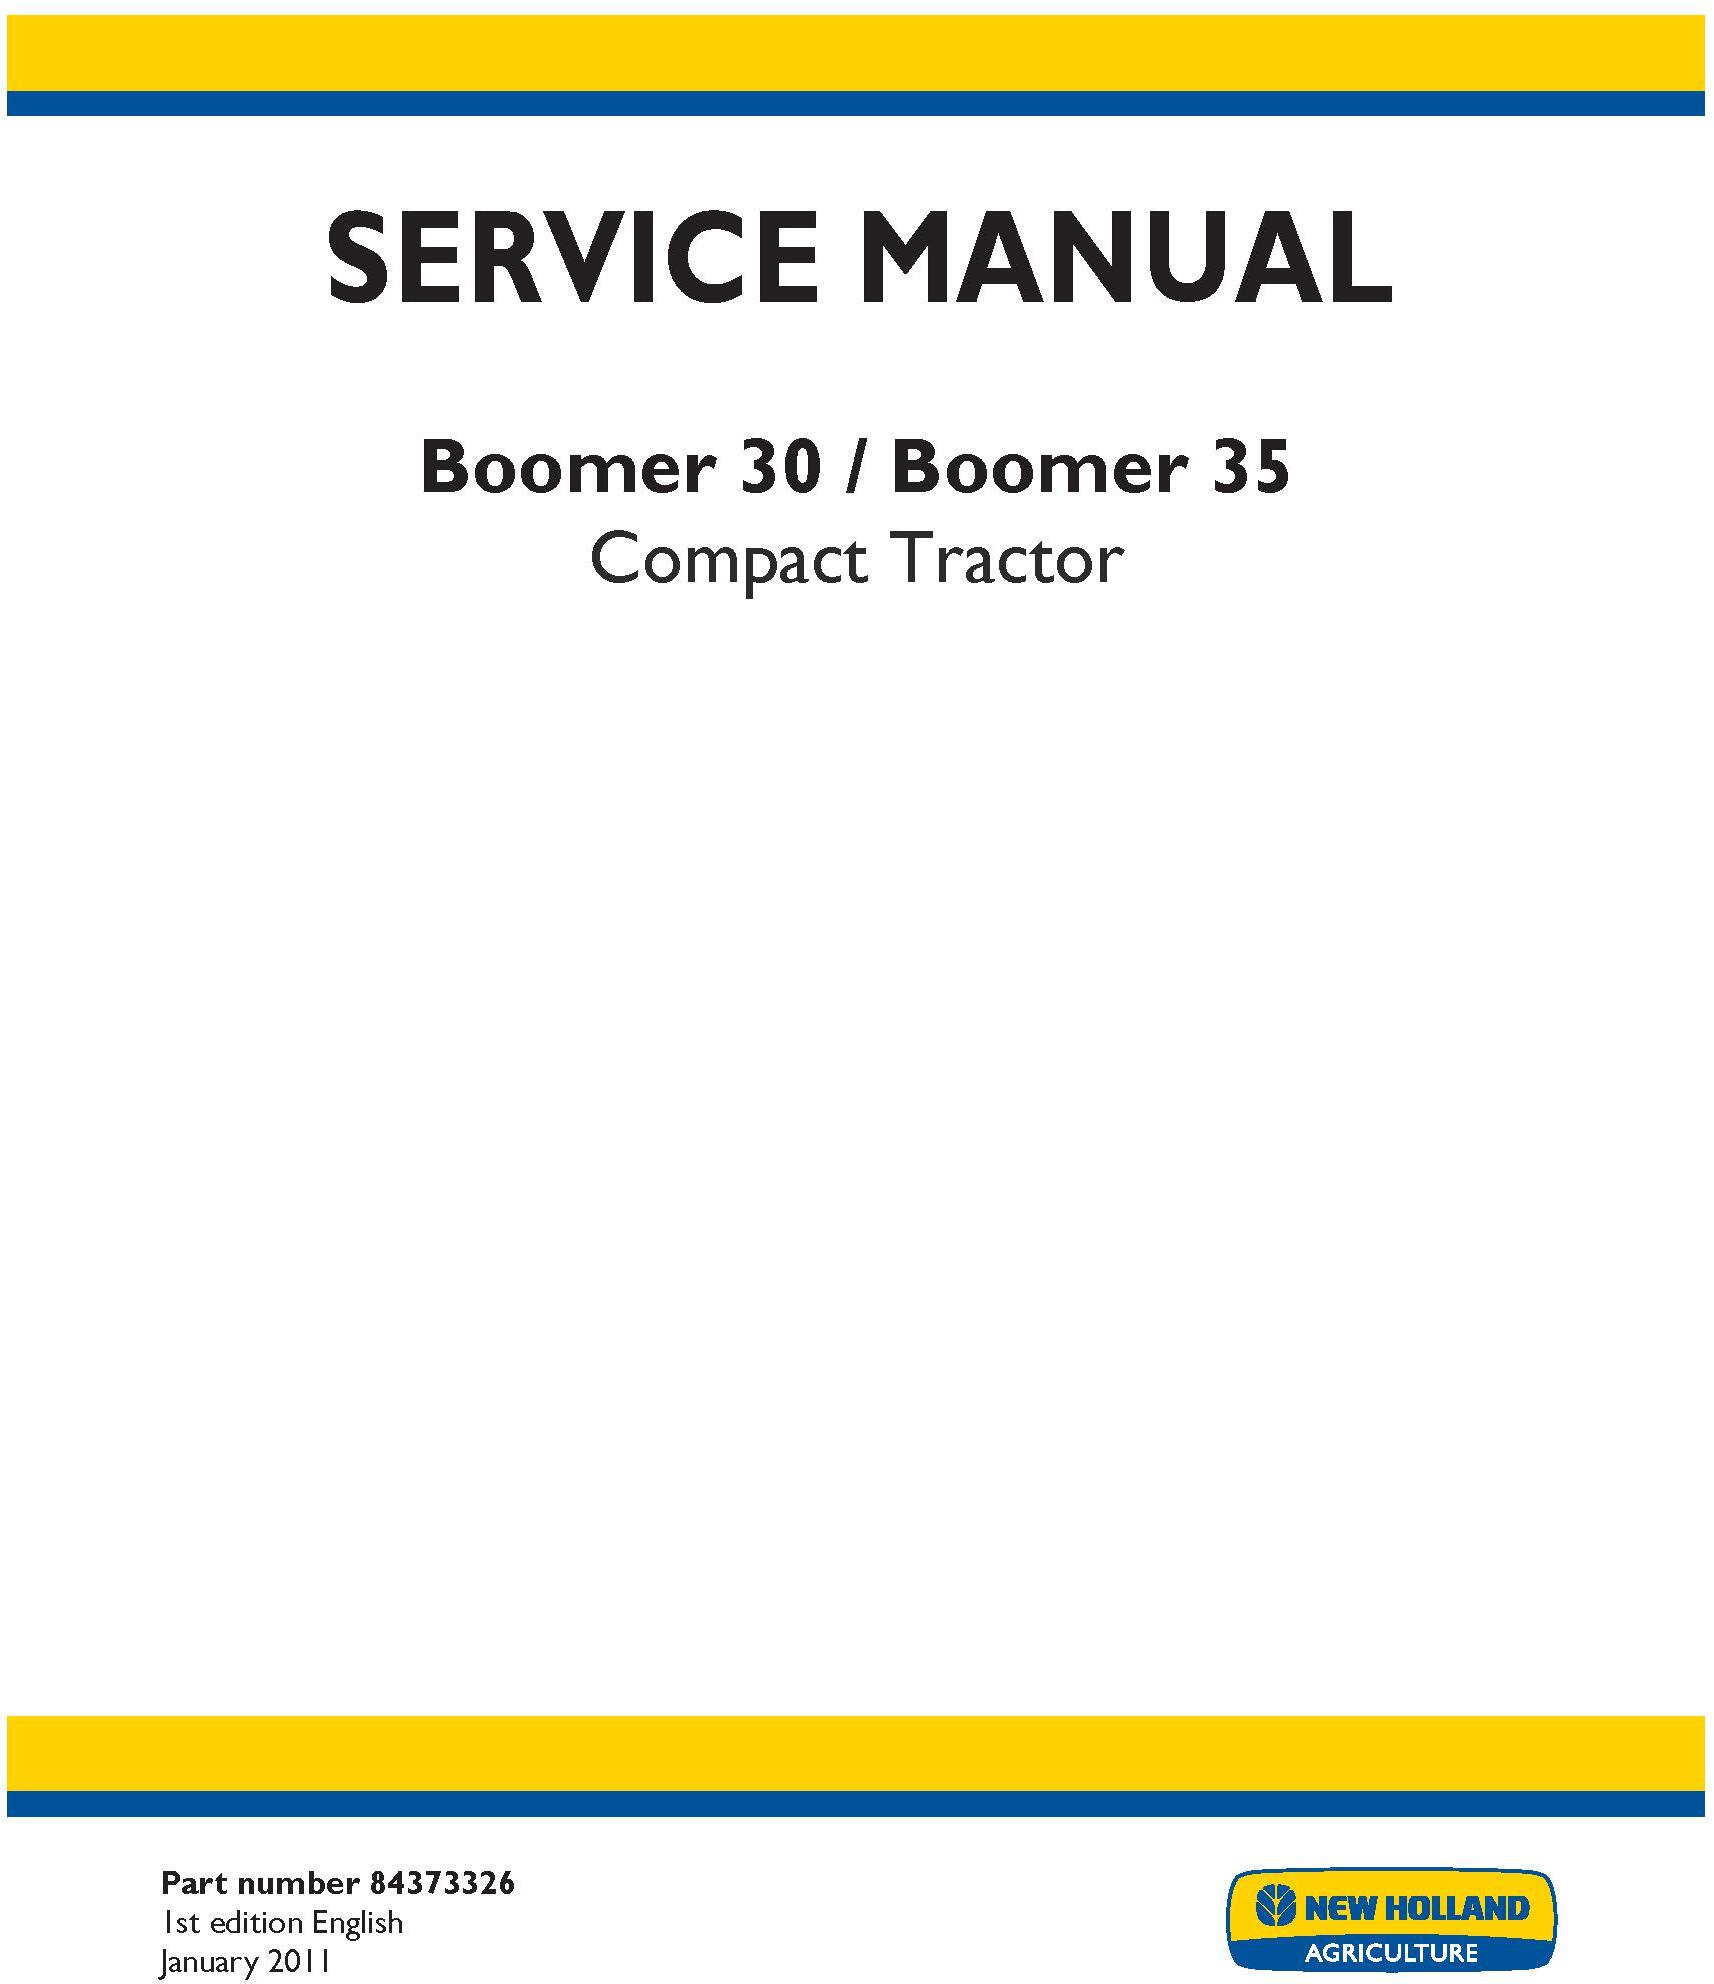 New Holland Boomer 30, Boomer 35 Compact Tractor Service Manual